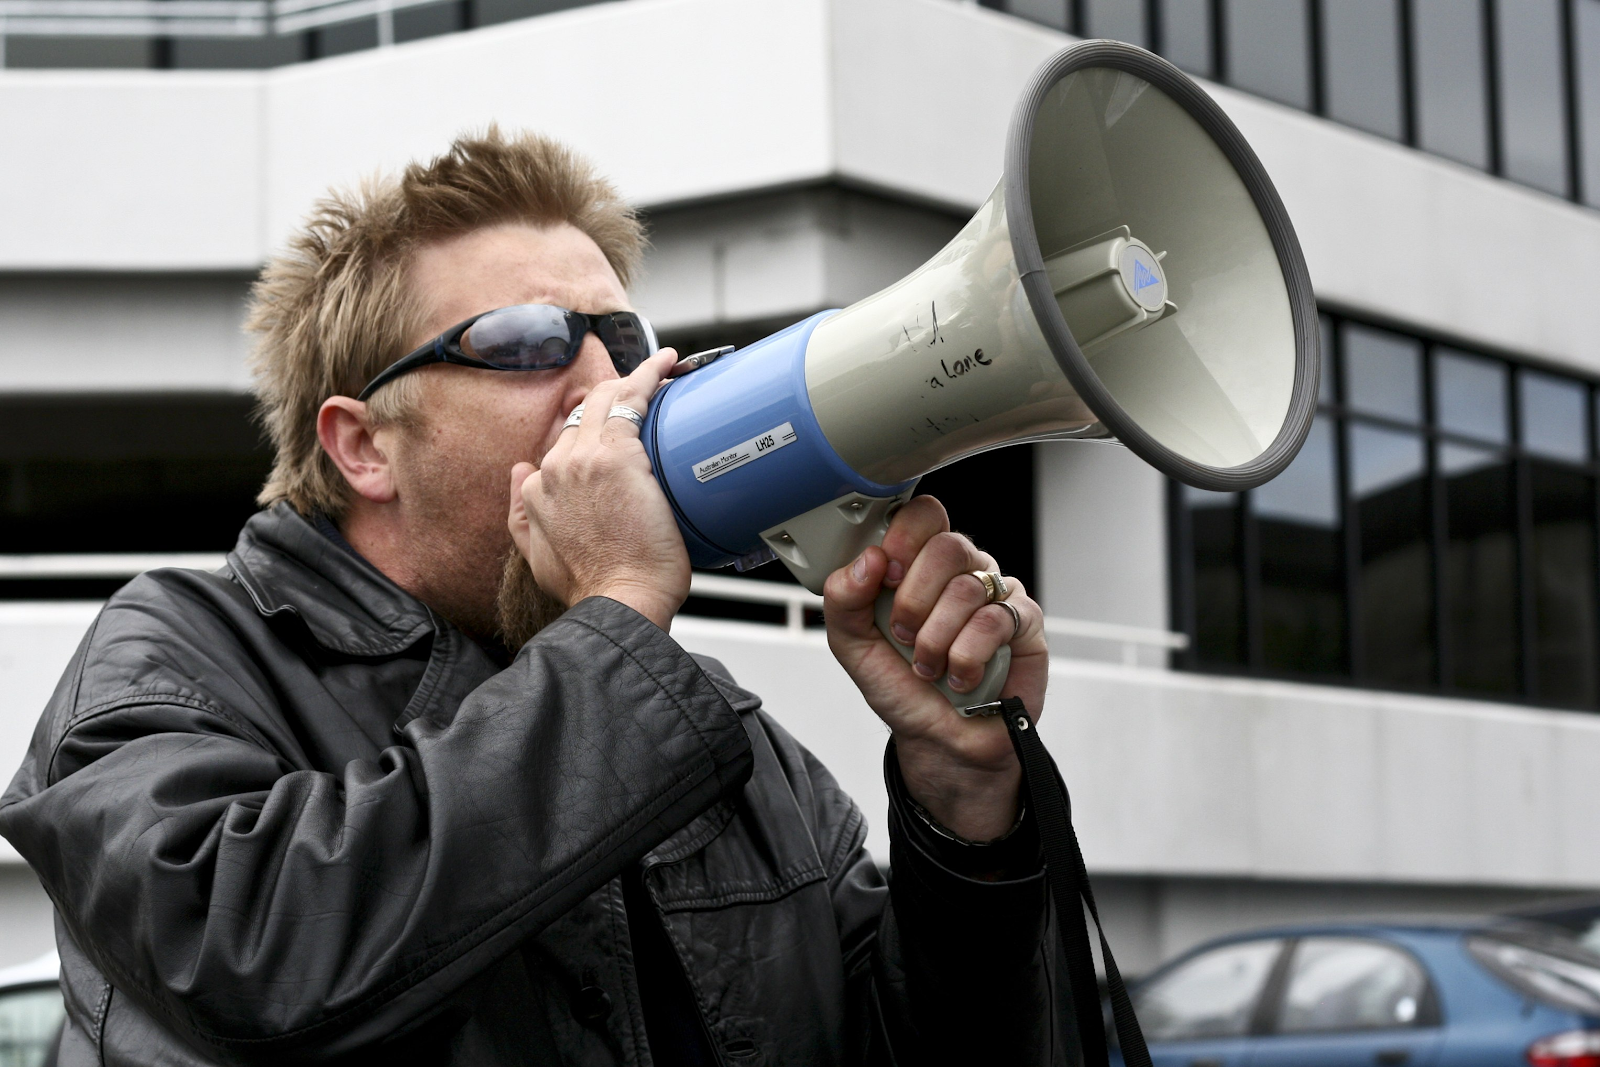 Image of a man yelling into a megaphone